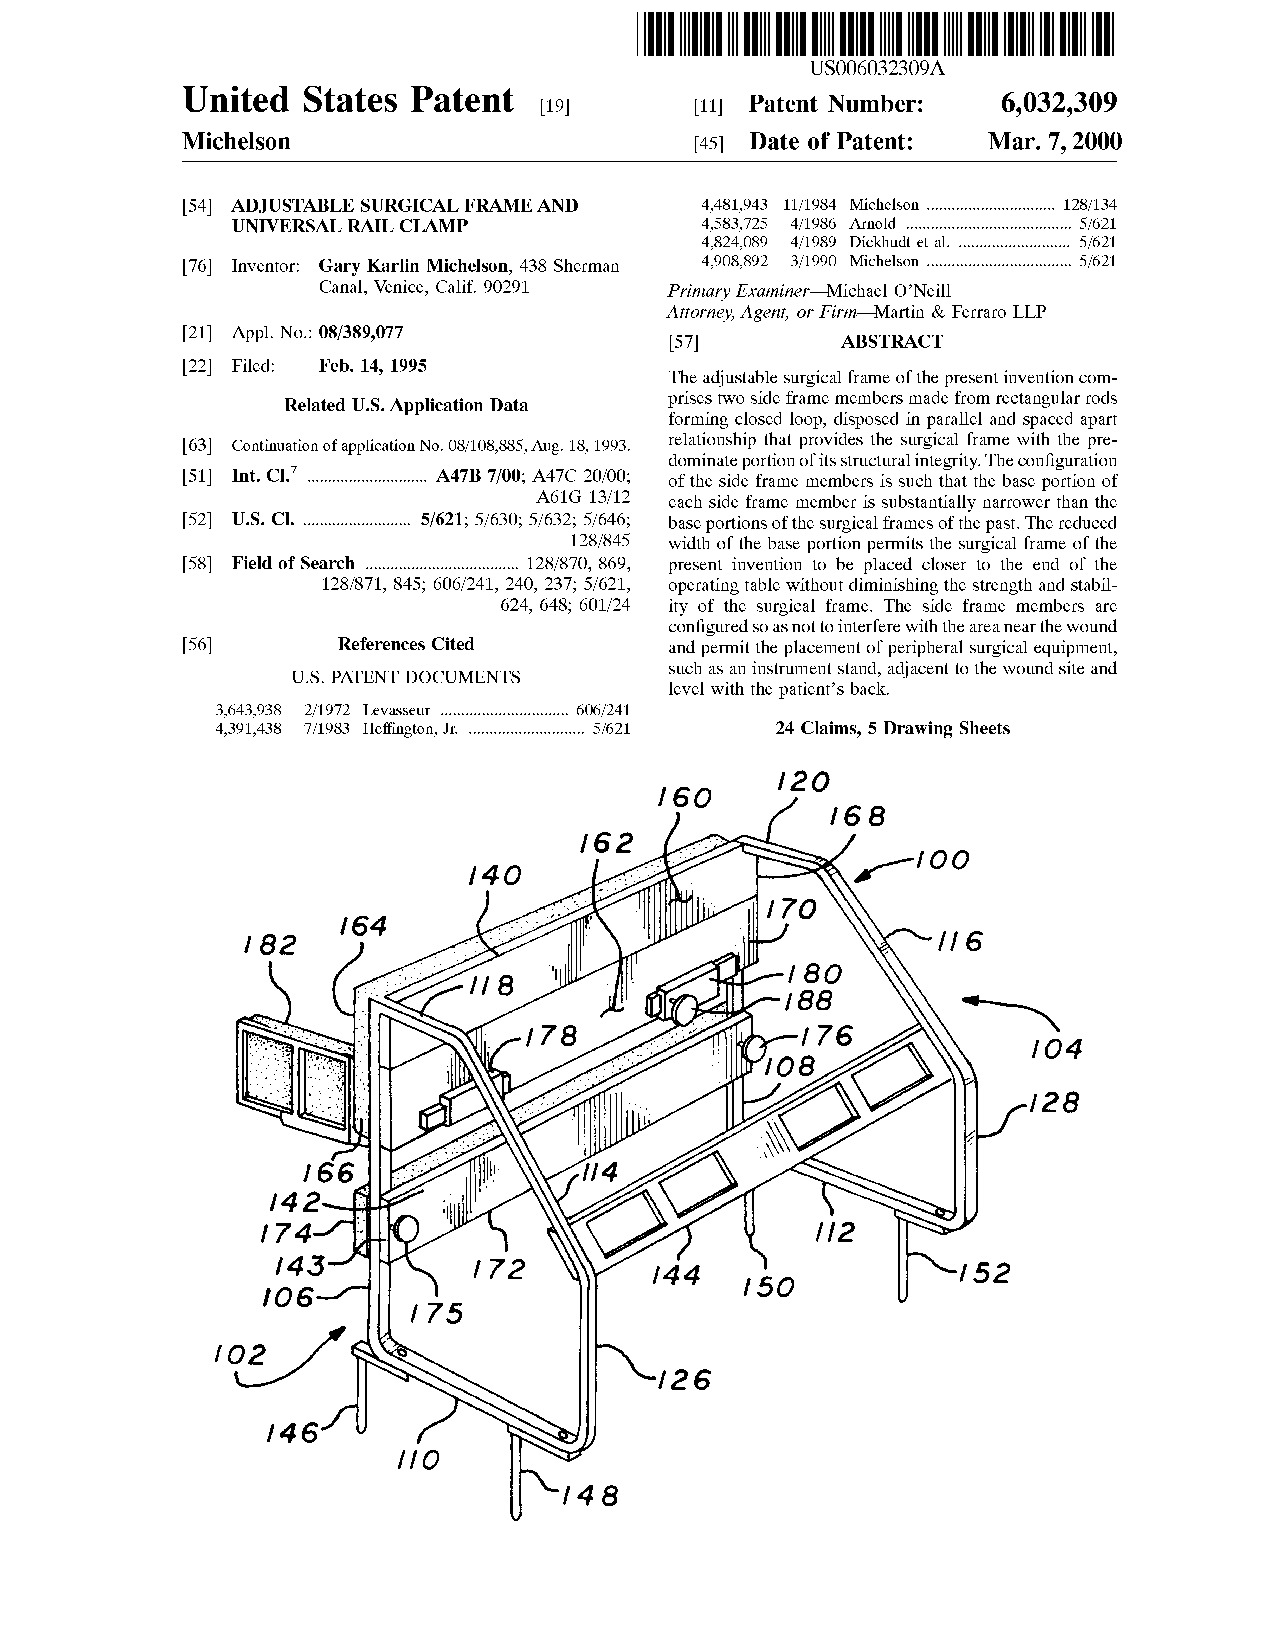 Adjustable surgical frame and universal rail clamp - Patent 6,032,309